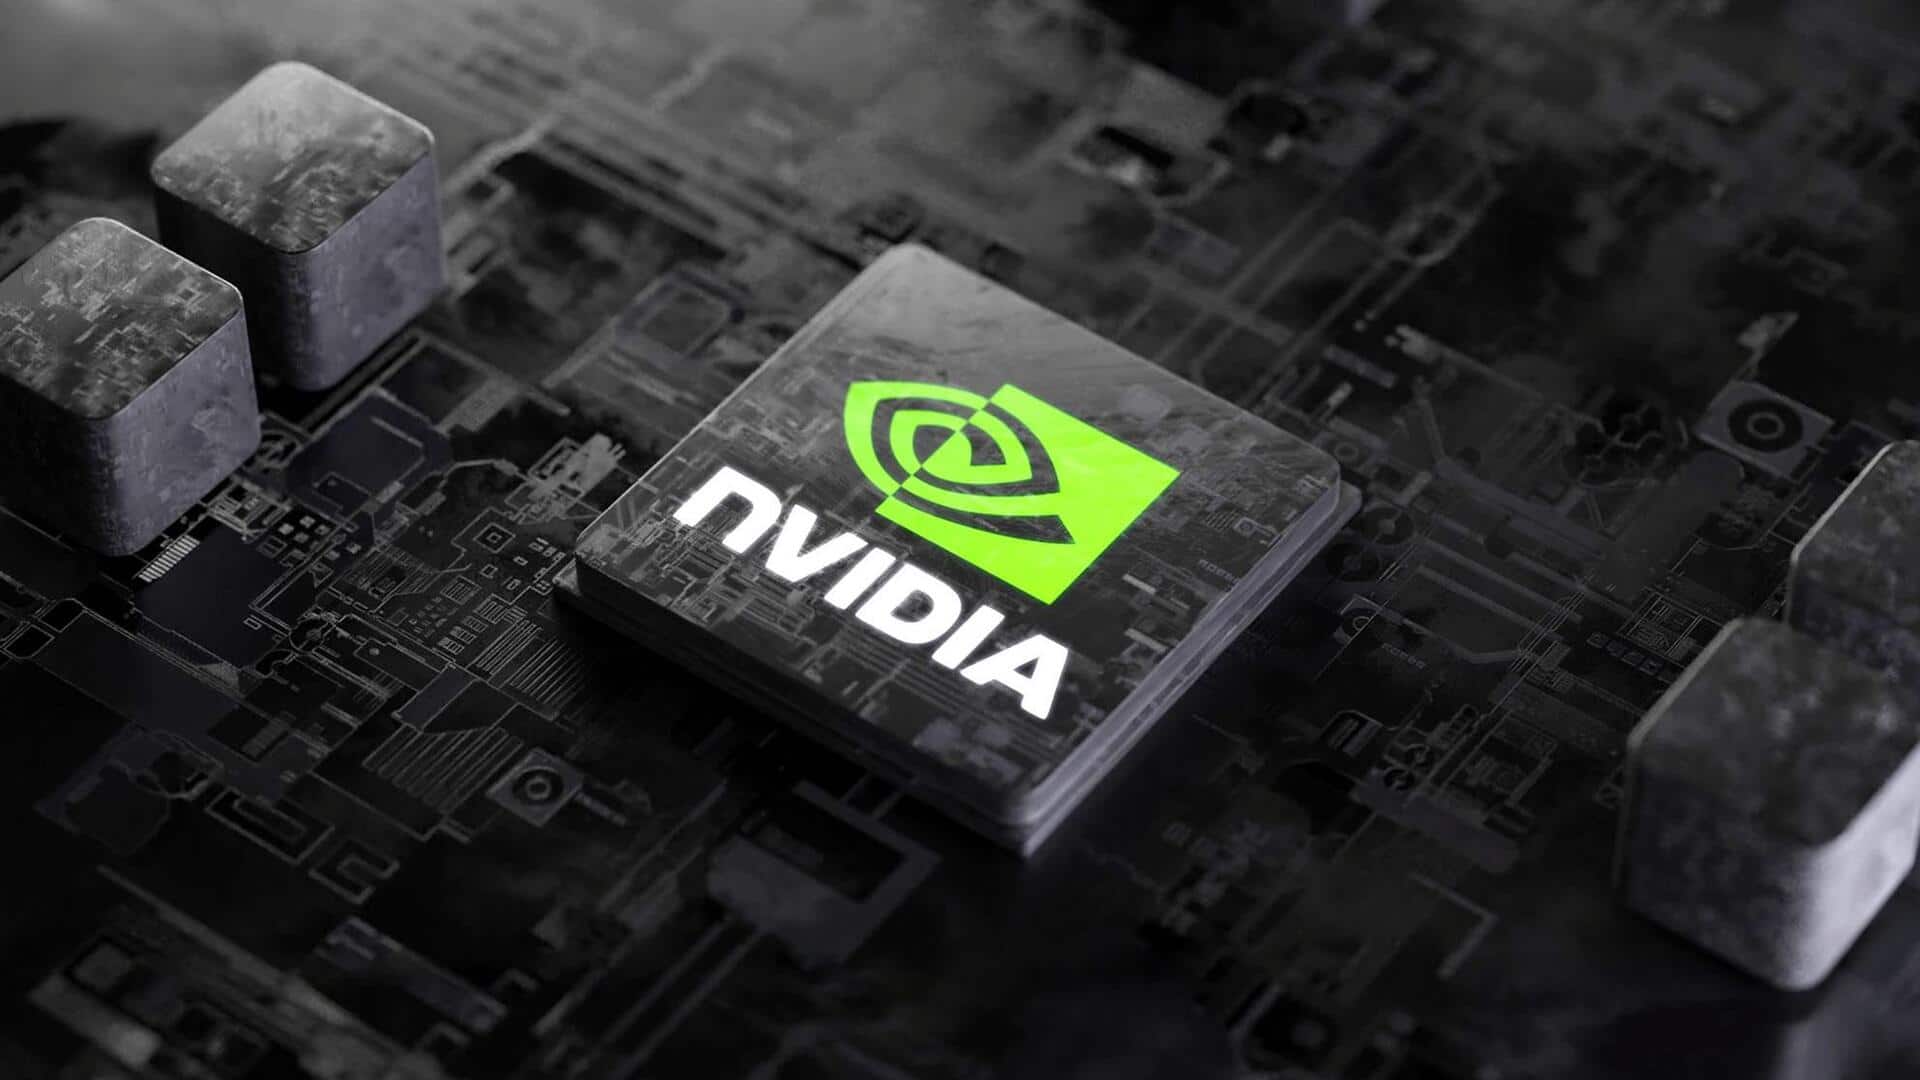 NVIDIA, AMD plan to develop Arm-based PC chips by 2025